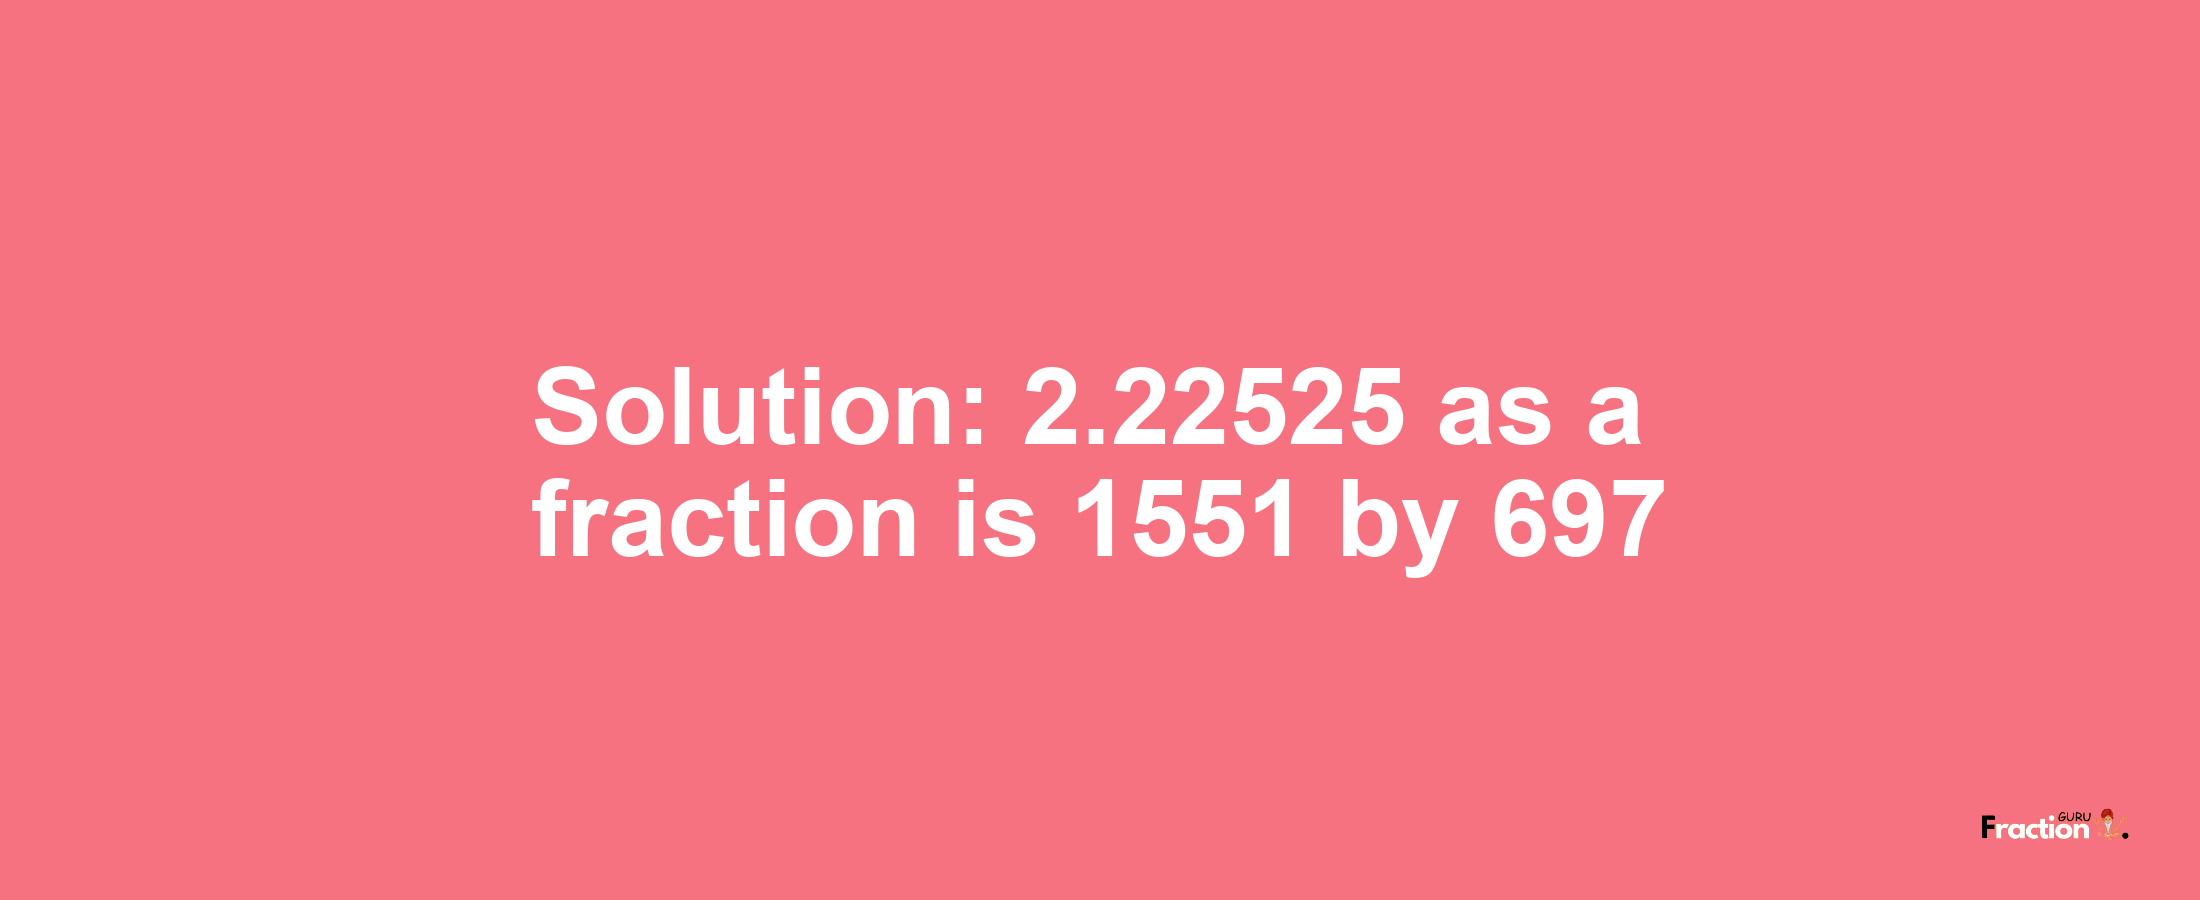 Solution:2.22525 as a fraction is 1551/697